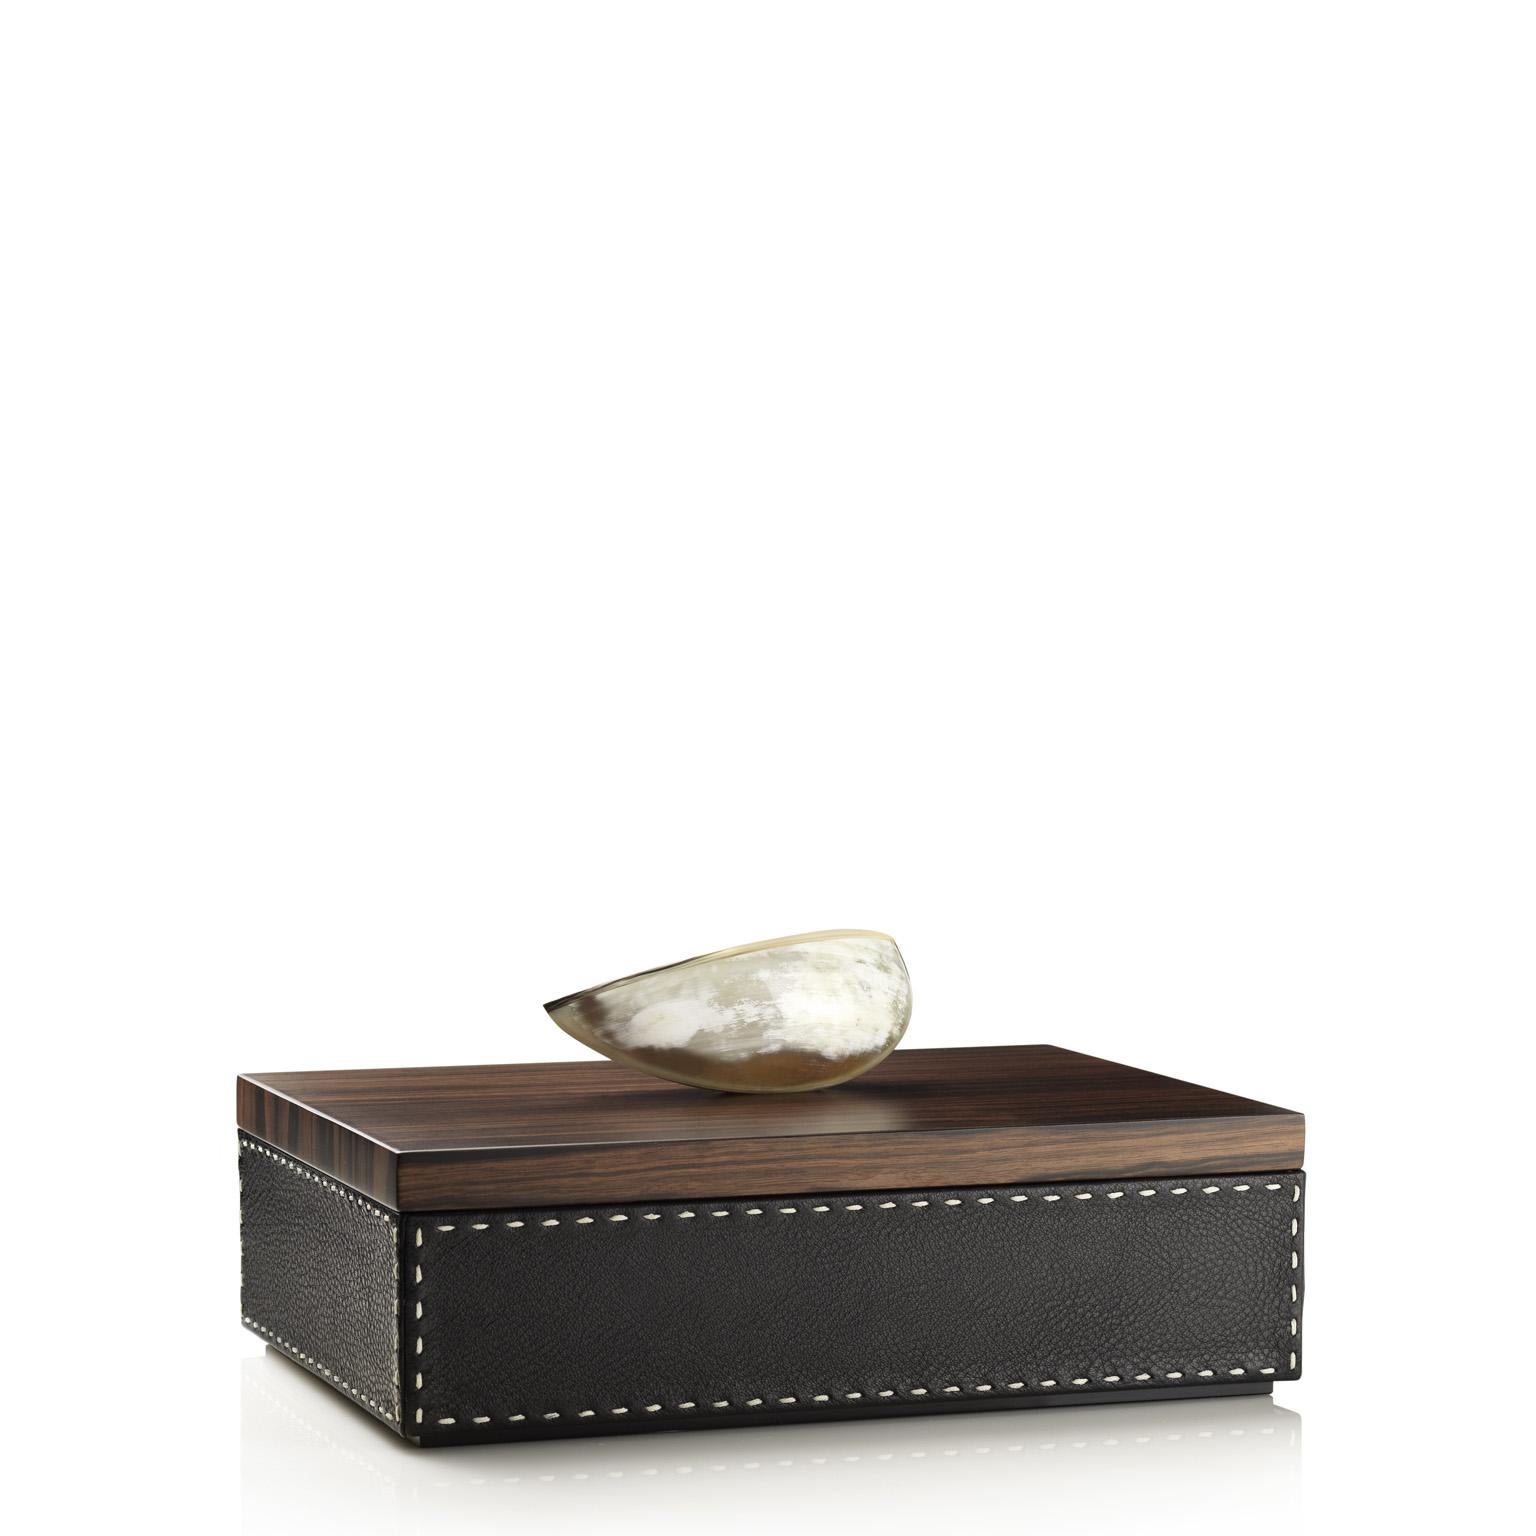 Befitting of all decor, the Capricia rectangular box will be a unique addition to your vanity station or to any other place in your home and office. Clad in Aida pebbled leather in a natural Onyx colour, Capricia sports a cream-colored handmade